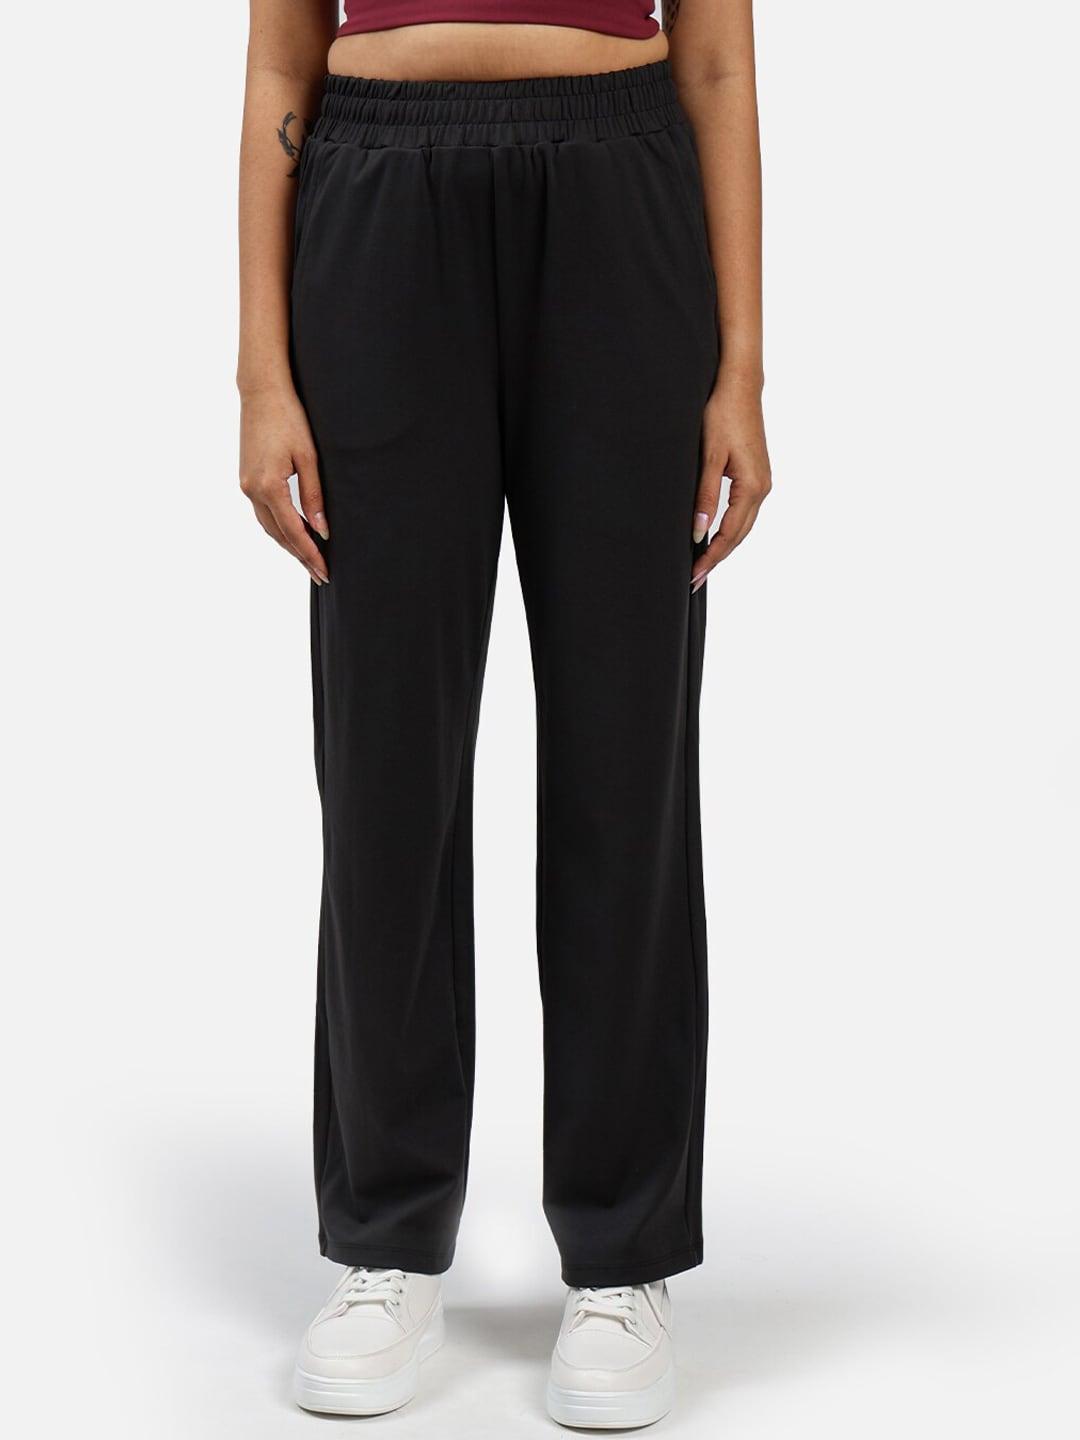 Blissclub Women Relaxed Fit Moisture-Wicking Track Pants